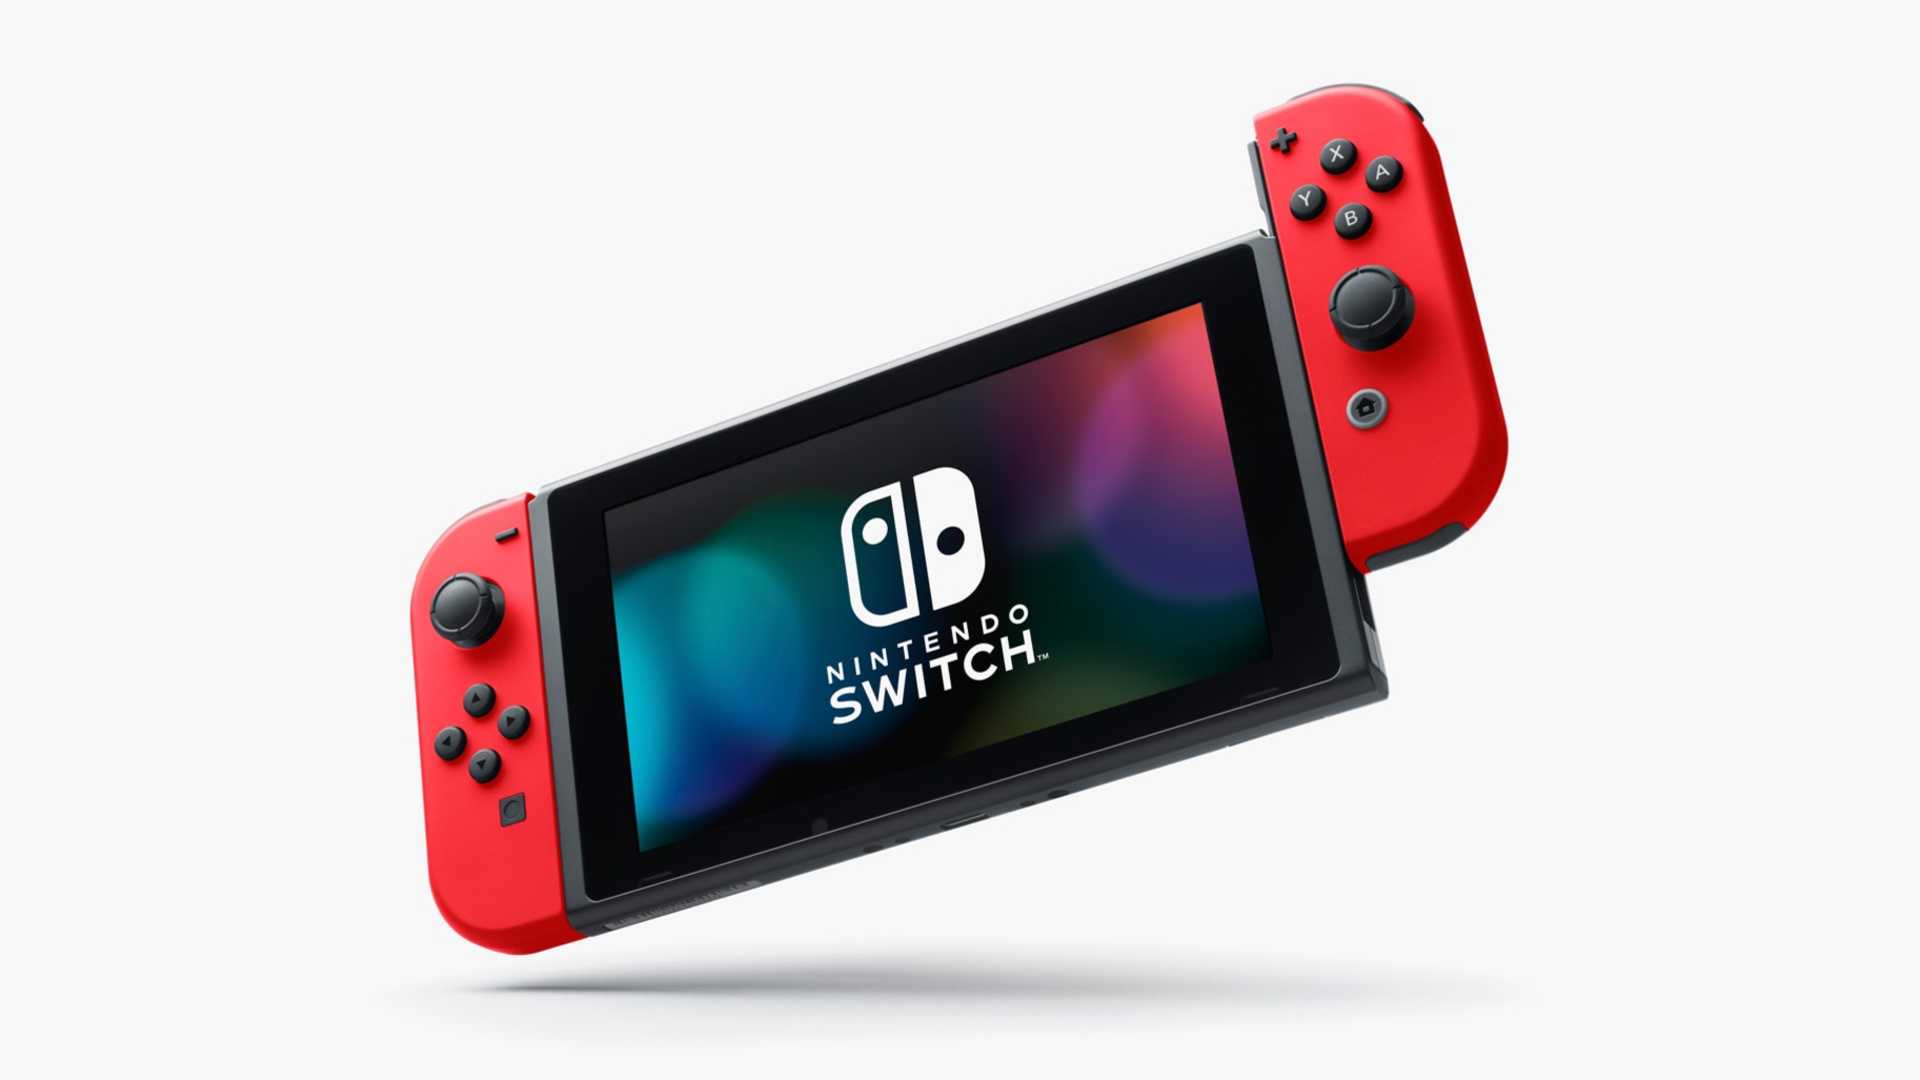 Nintendo Switch Pro could launch in September or October